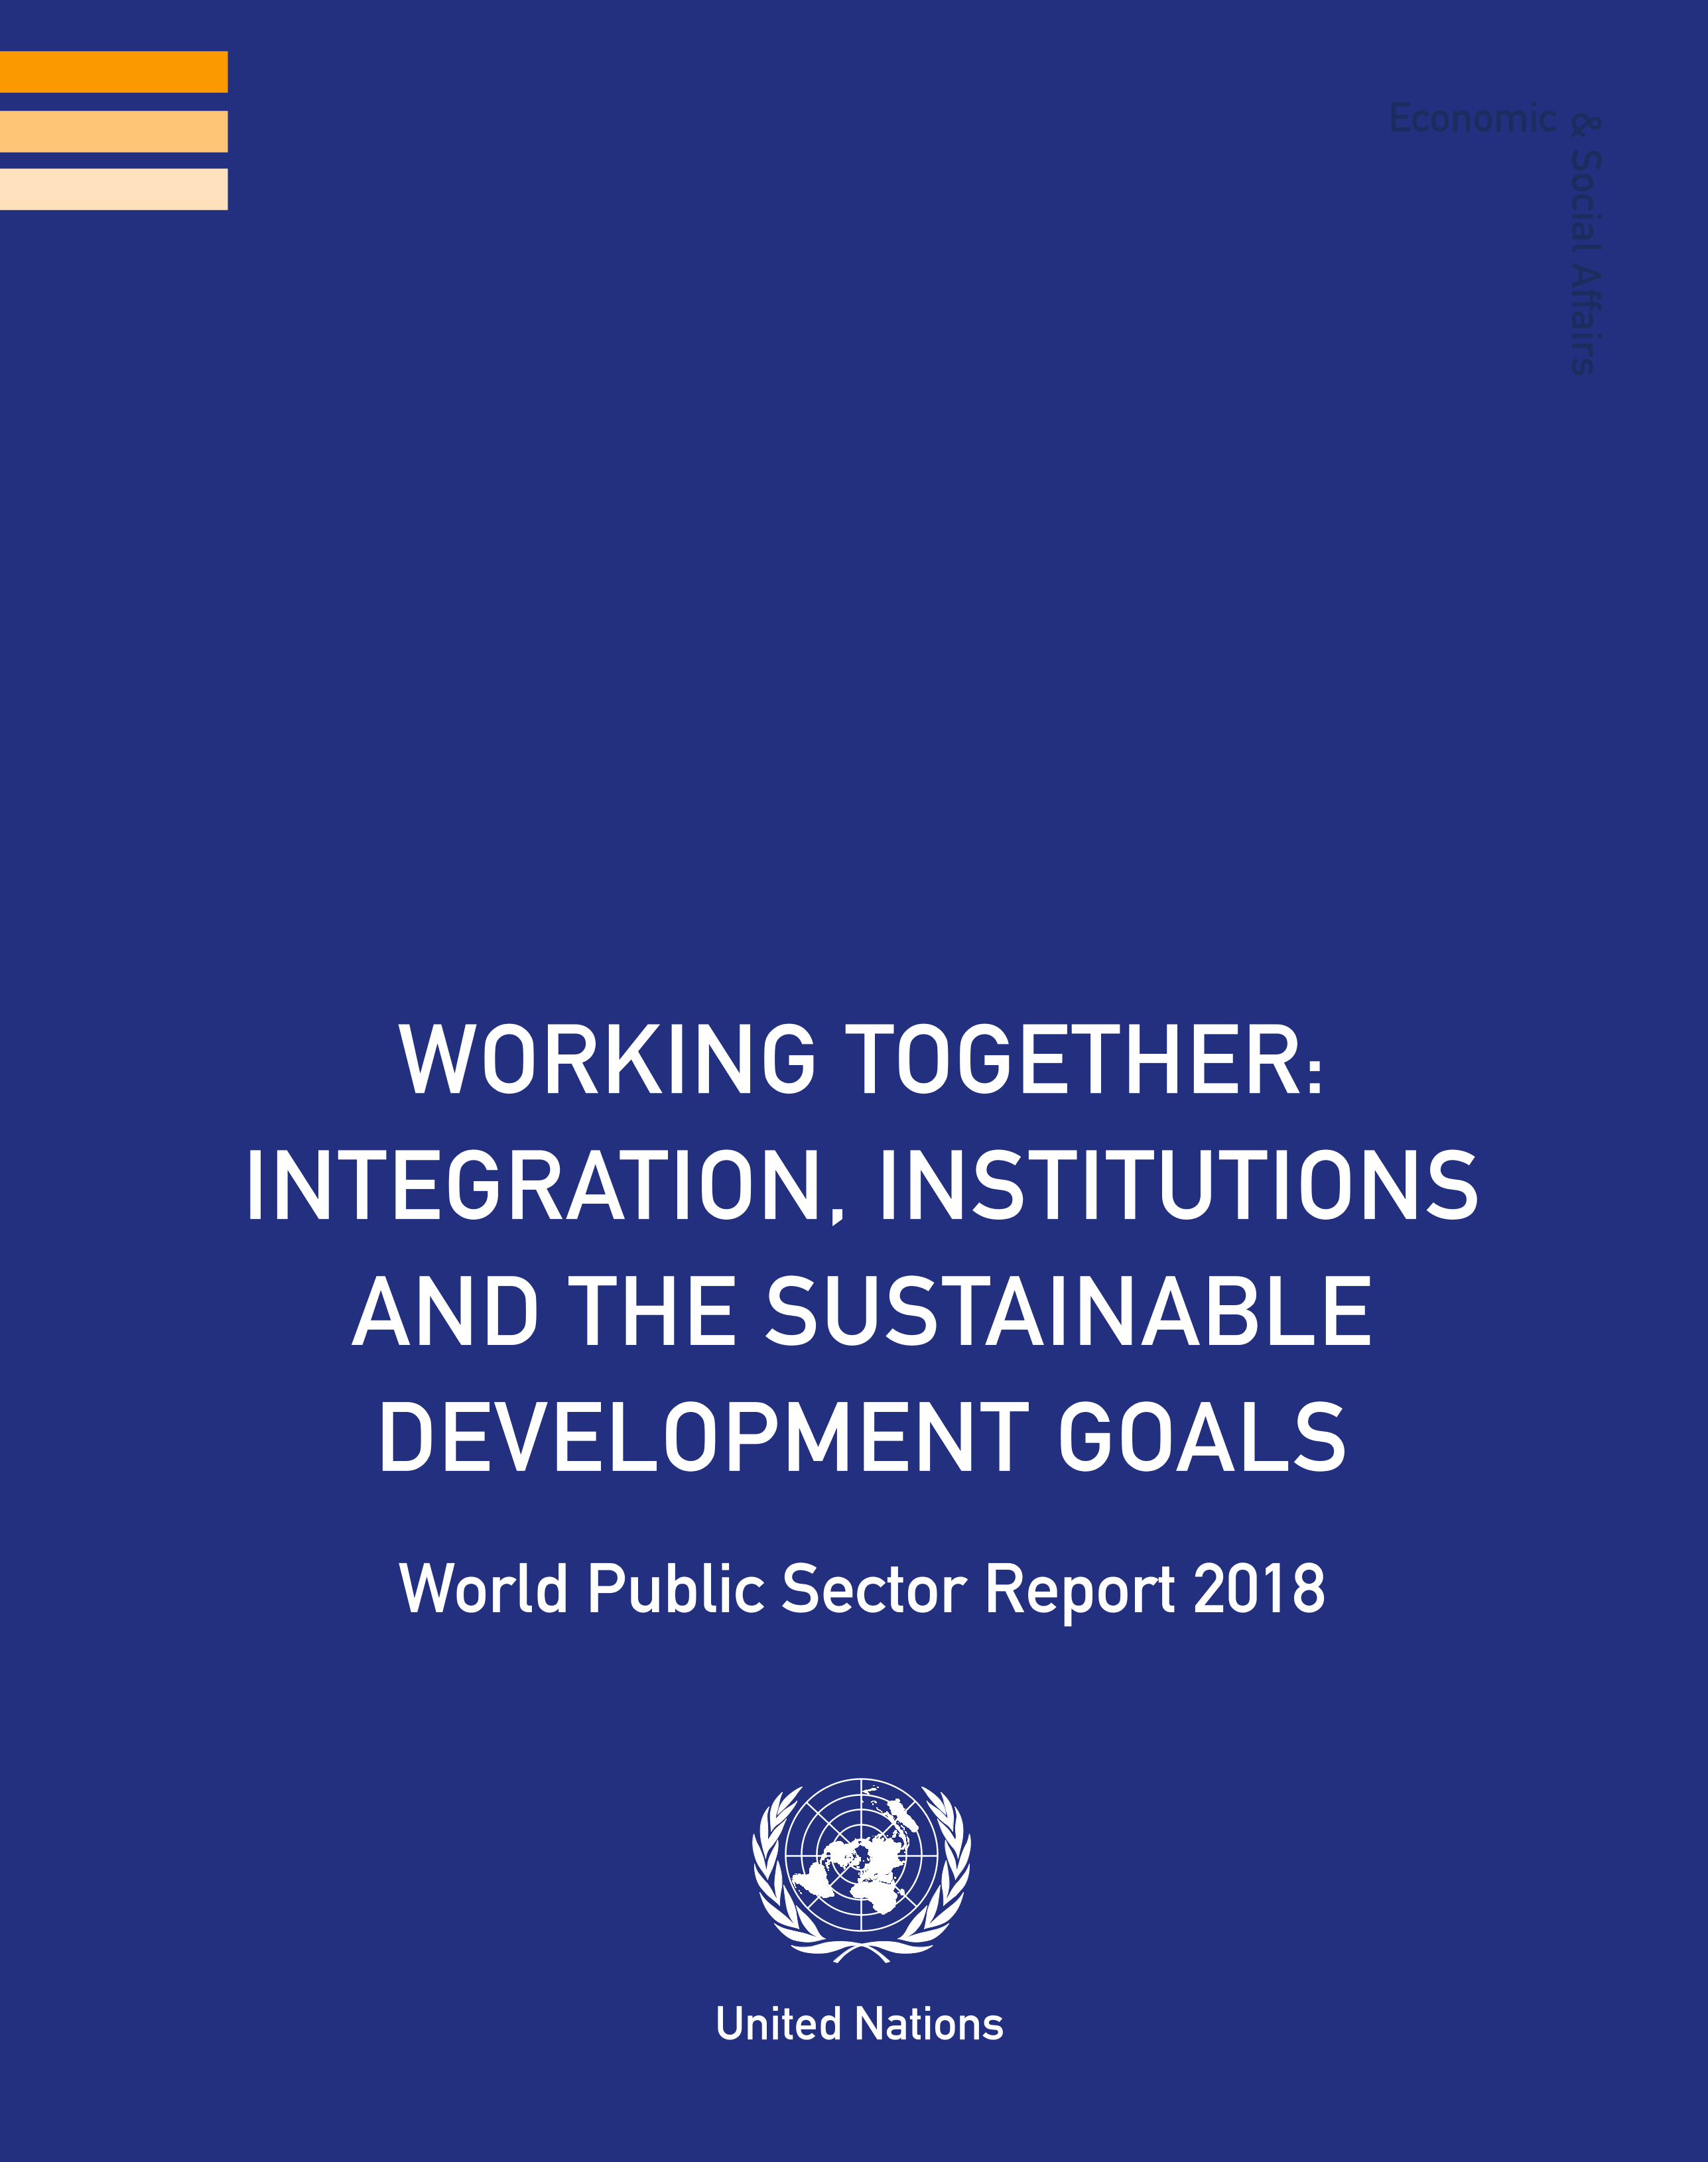 working together_integration_institutions_and_the_sdg.png